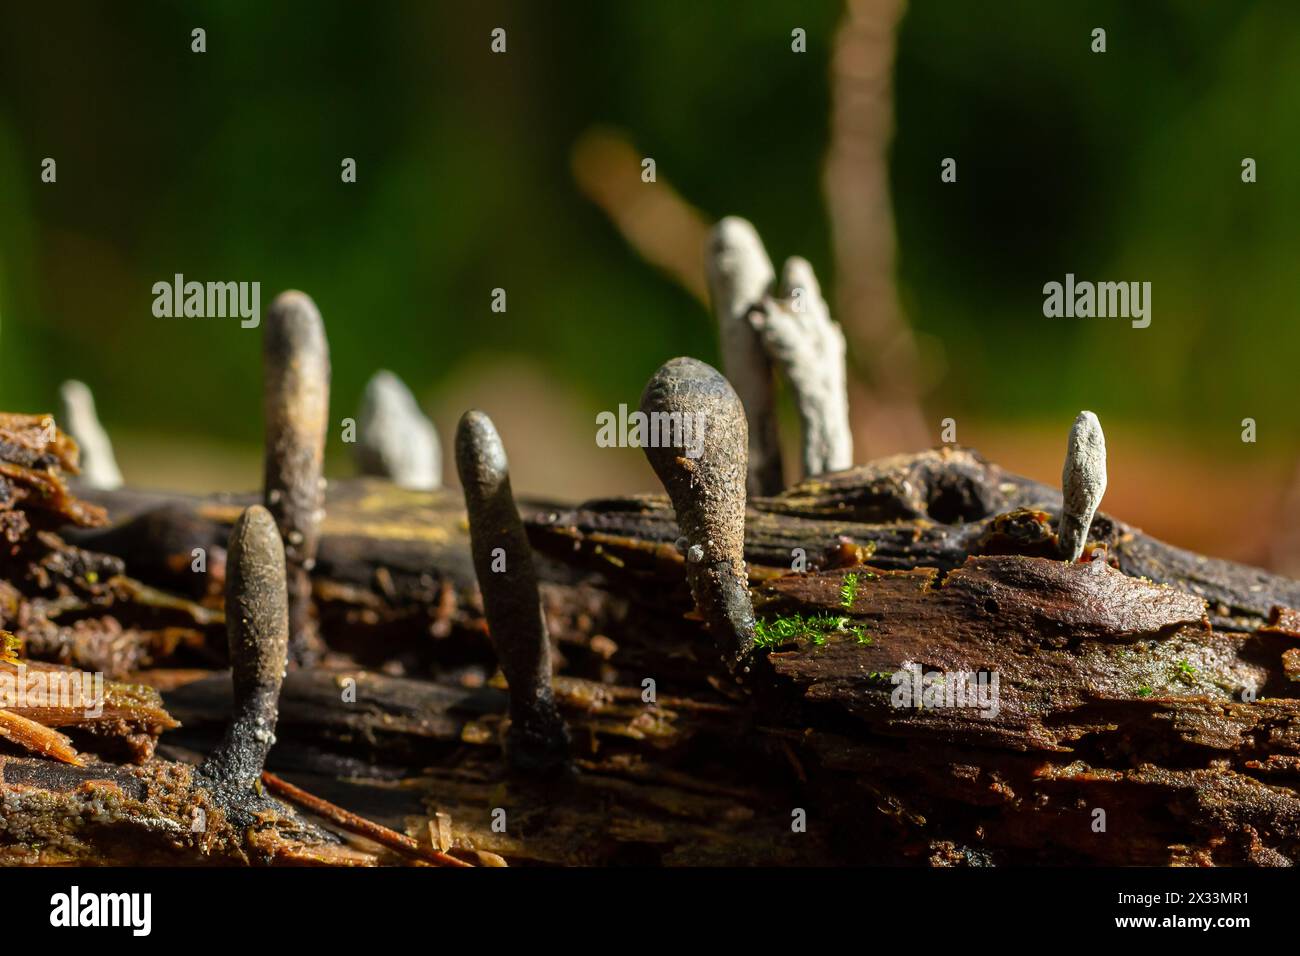 Xylaria hypoxylon is a species of fungus in the family Xylariaceae known by a variety of common names such as the candlestick fungus, the candlesnuff Stock Photo